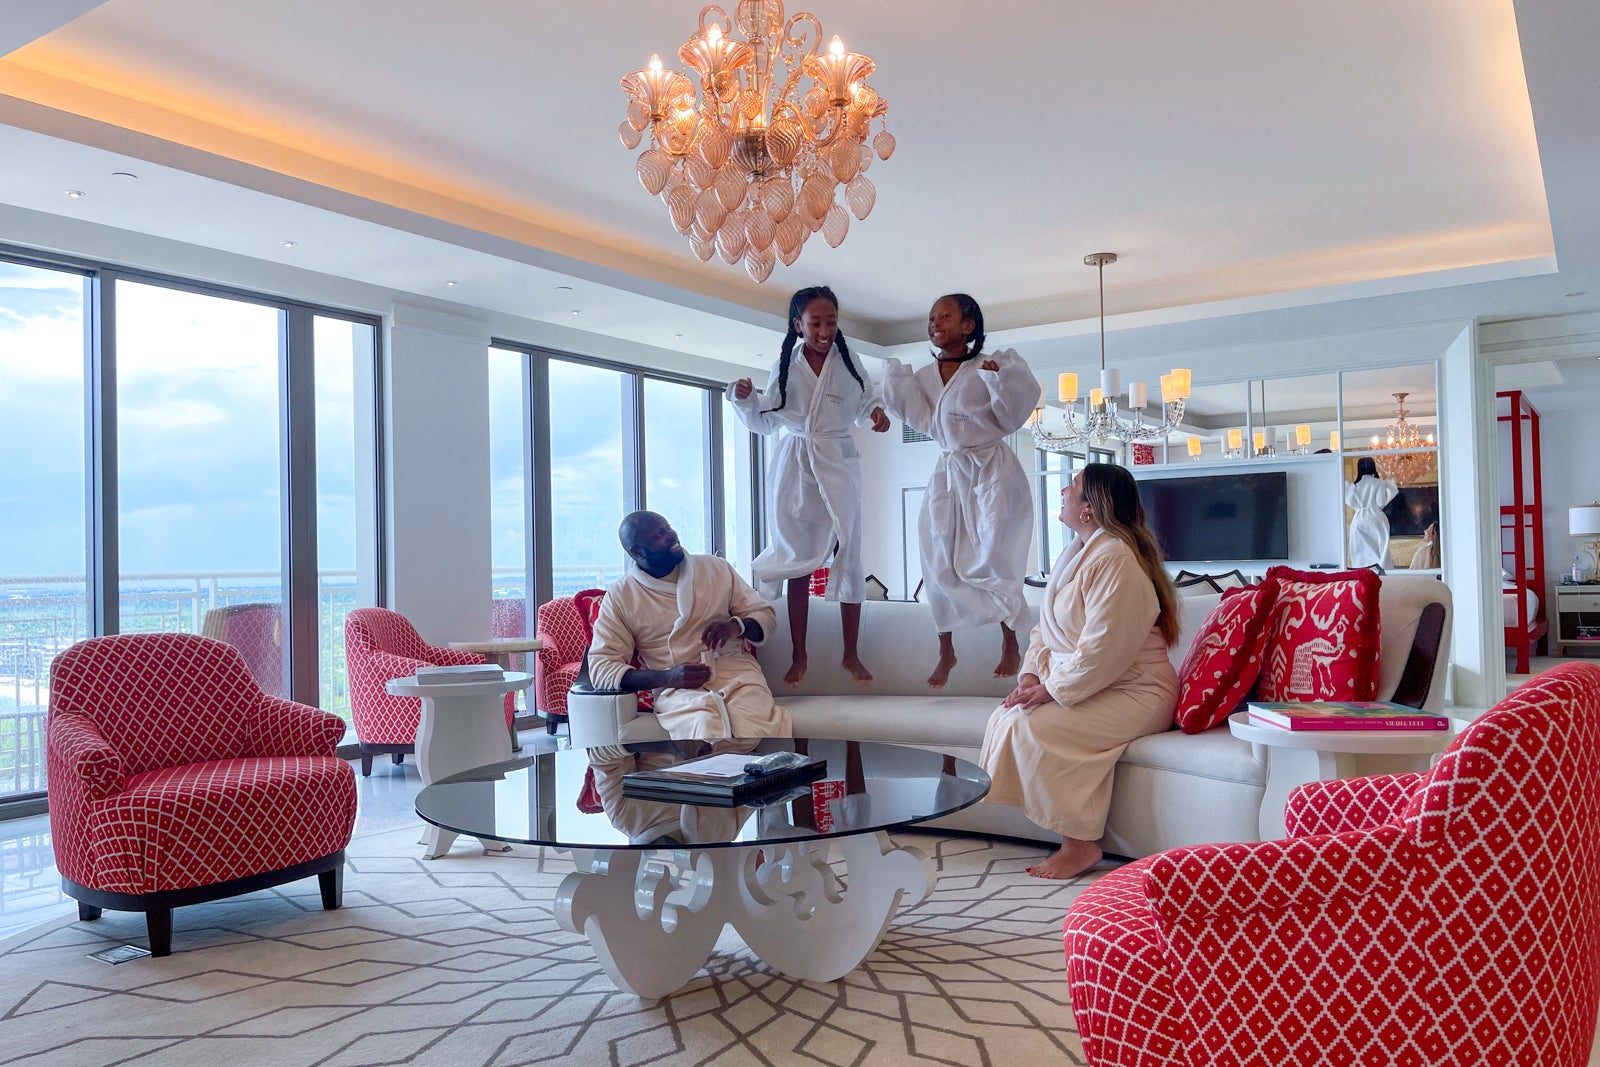 2 children jump on a sofa in a hotel room while their parents watch; all 4 people are wearing bath robes